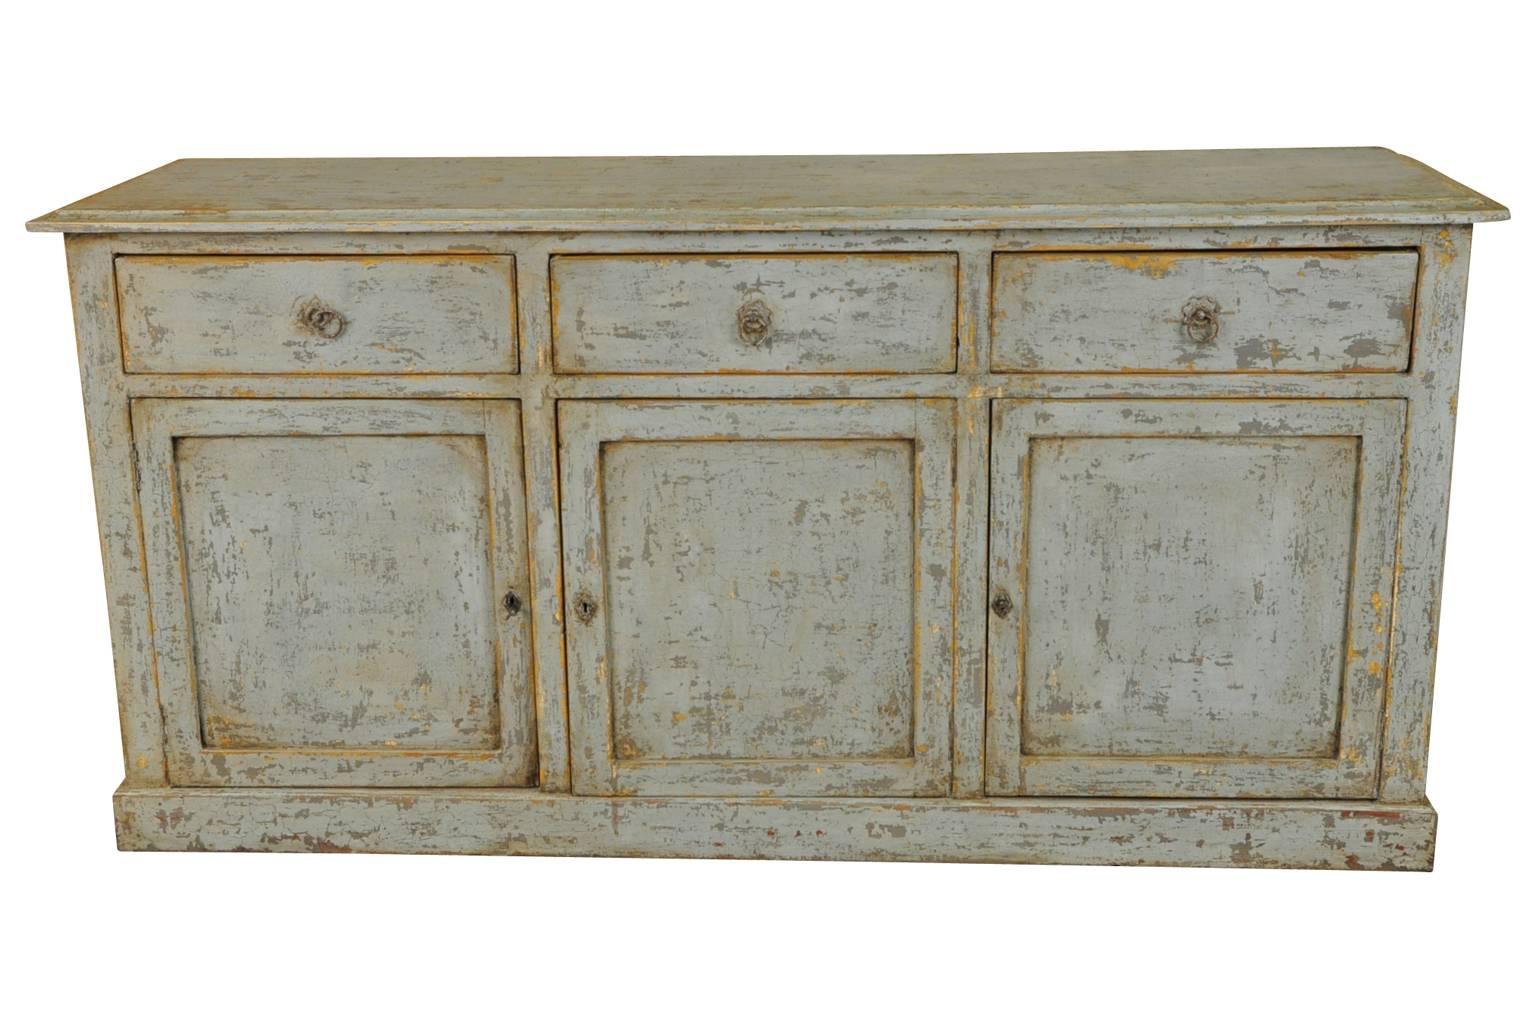 A wonderful three-door buffet from the Catalan region of Spain. Handsomely constructed from painted wood with three doors and three drawers. A terrific storage piece with nice narrow depth.